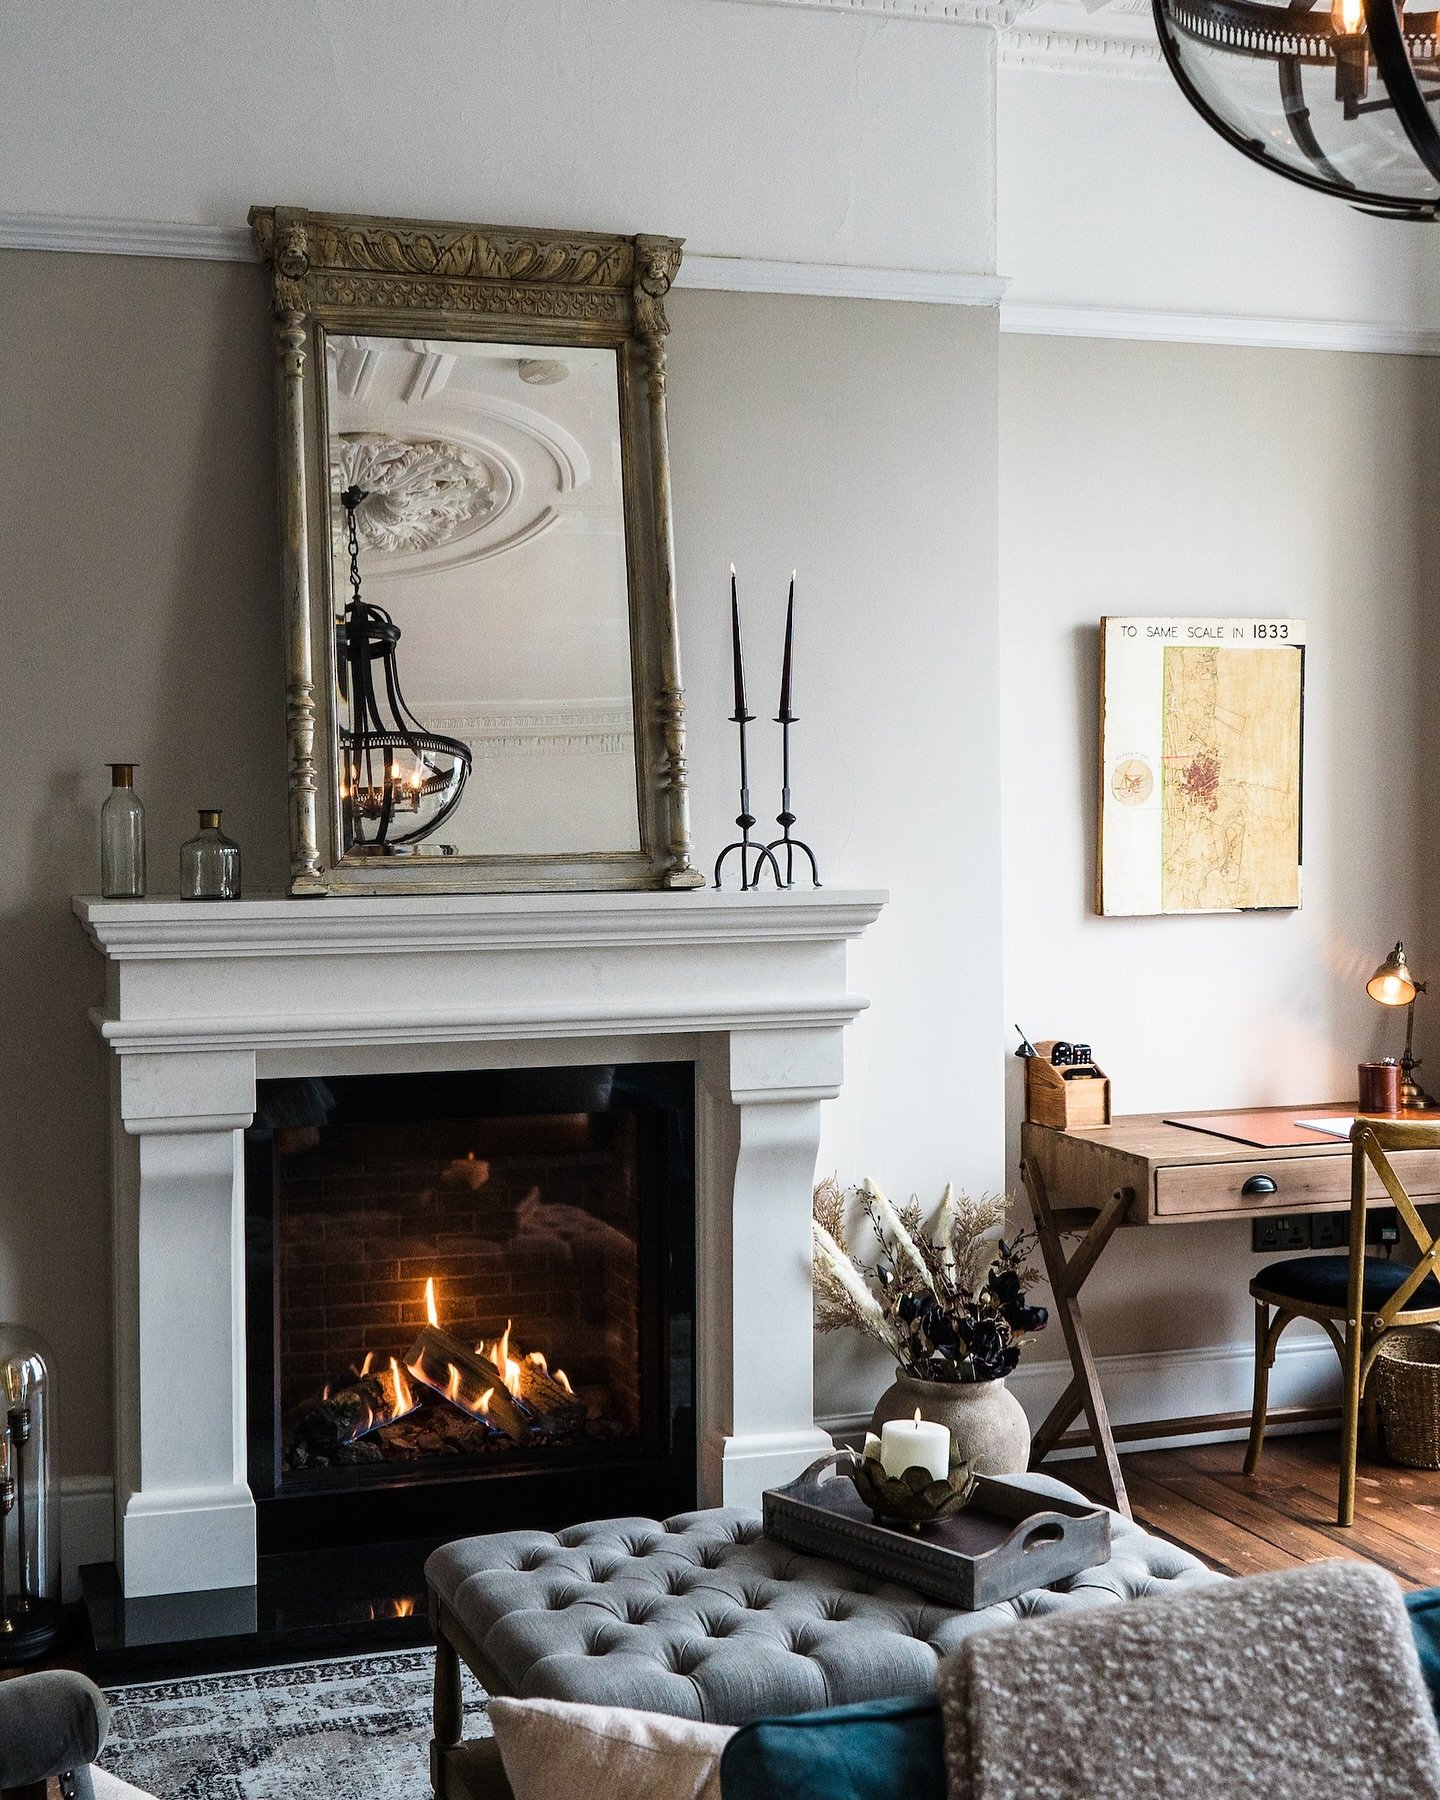 Dating back to 1846, Regency House has a longstanding history as a neighbourhood hub. 

Some hundred years later, Regency House is breathing life back into the Crescent once again, bringing people together in the way of exceptional hospitality and 